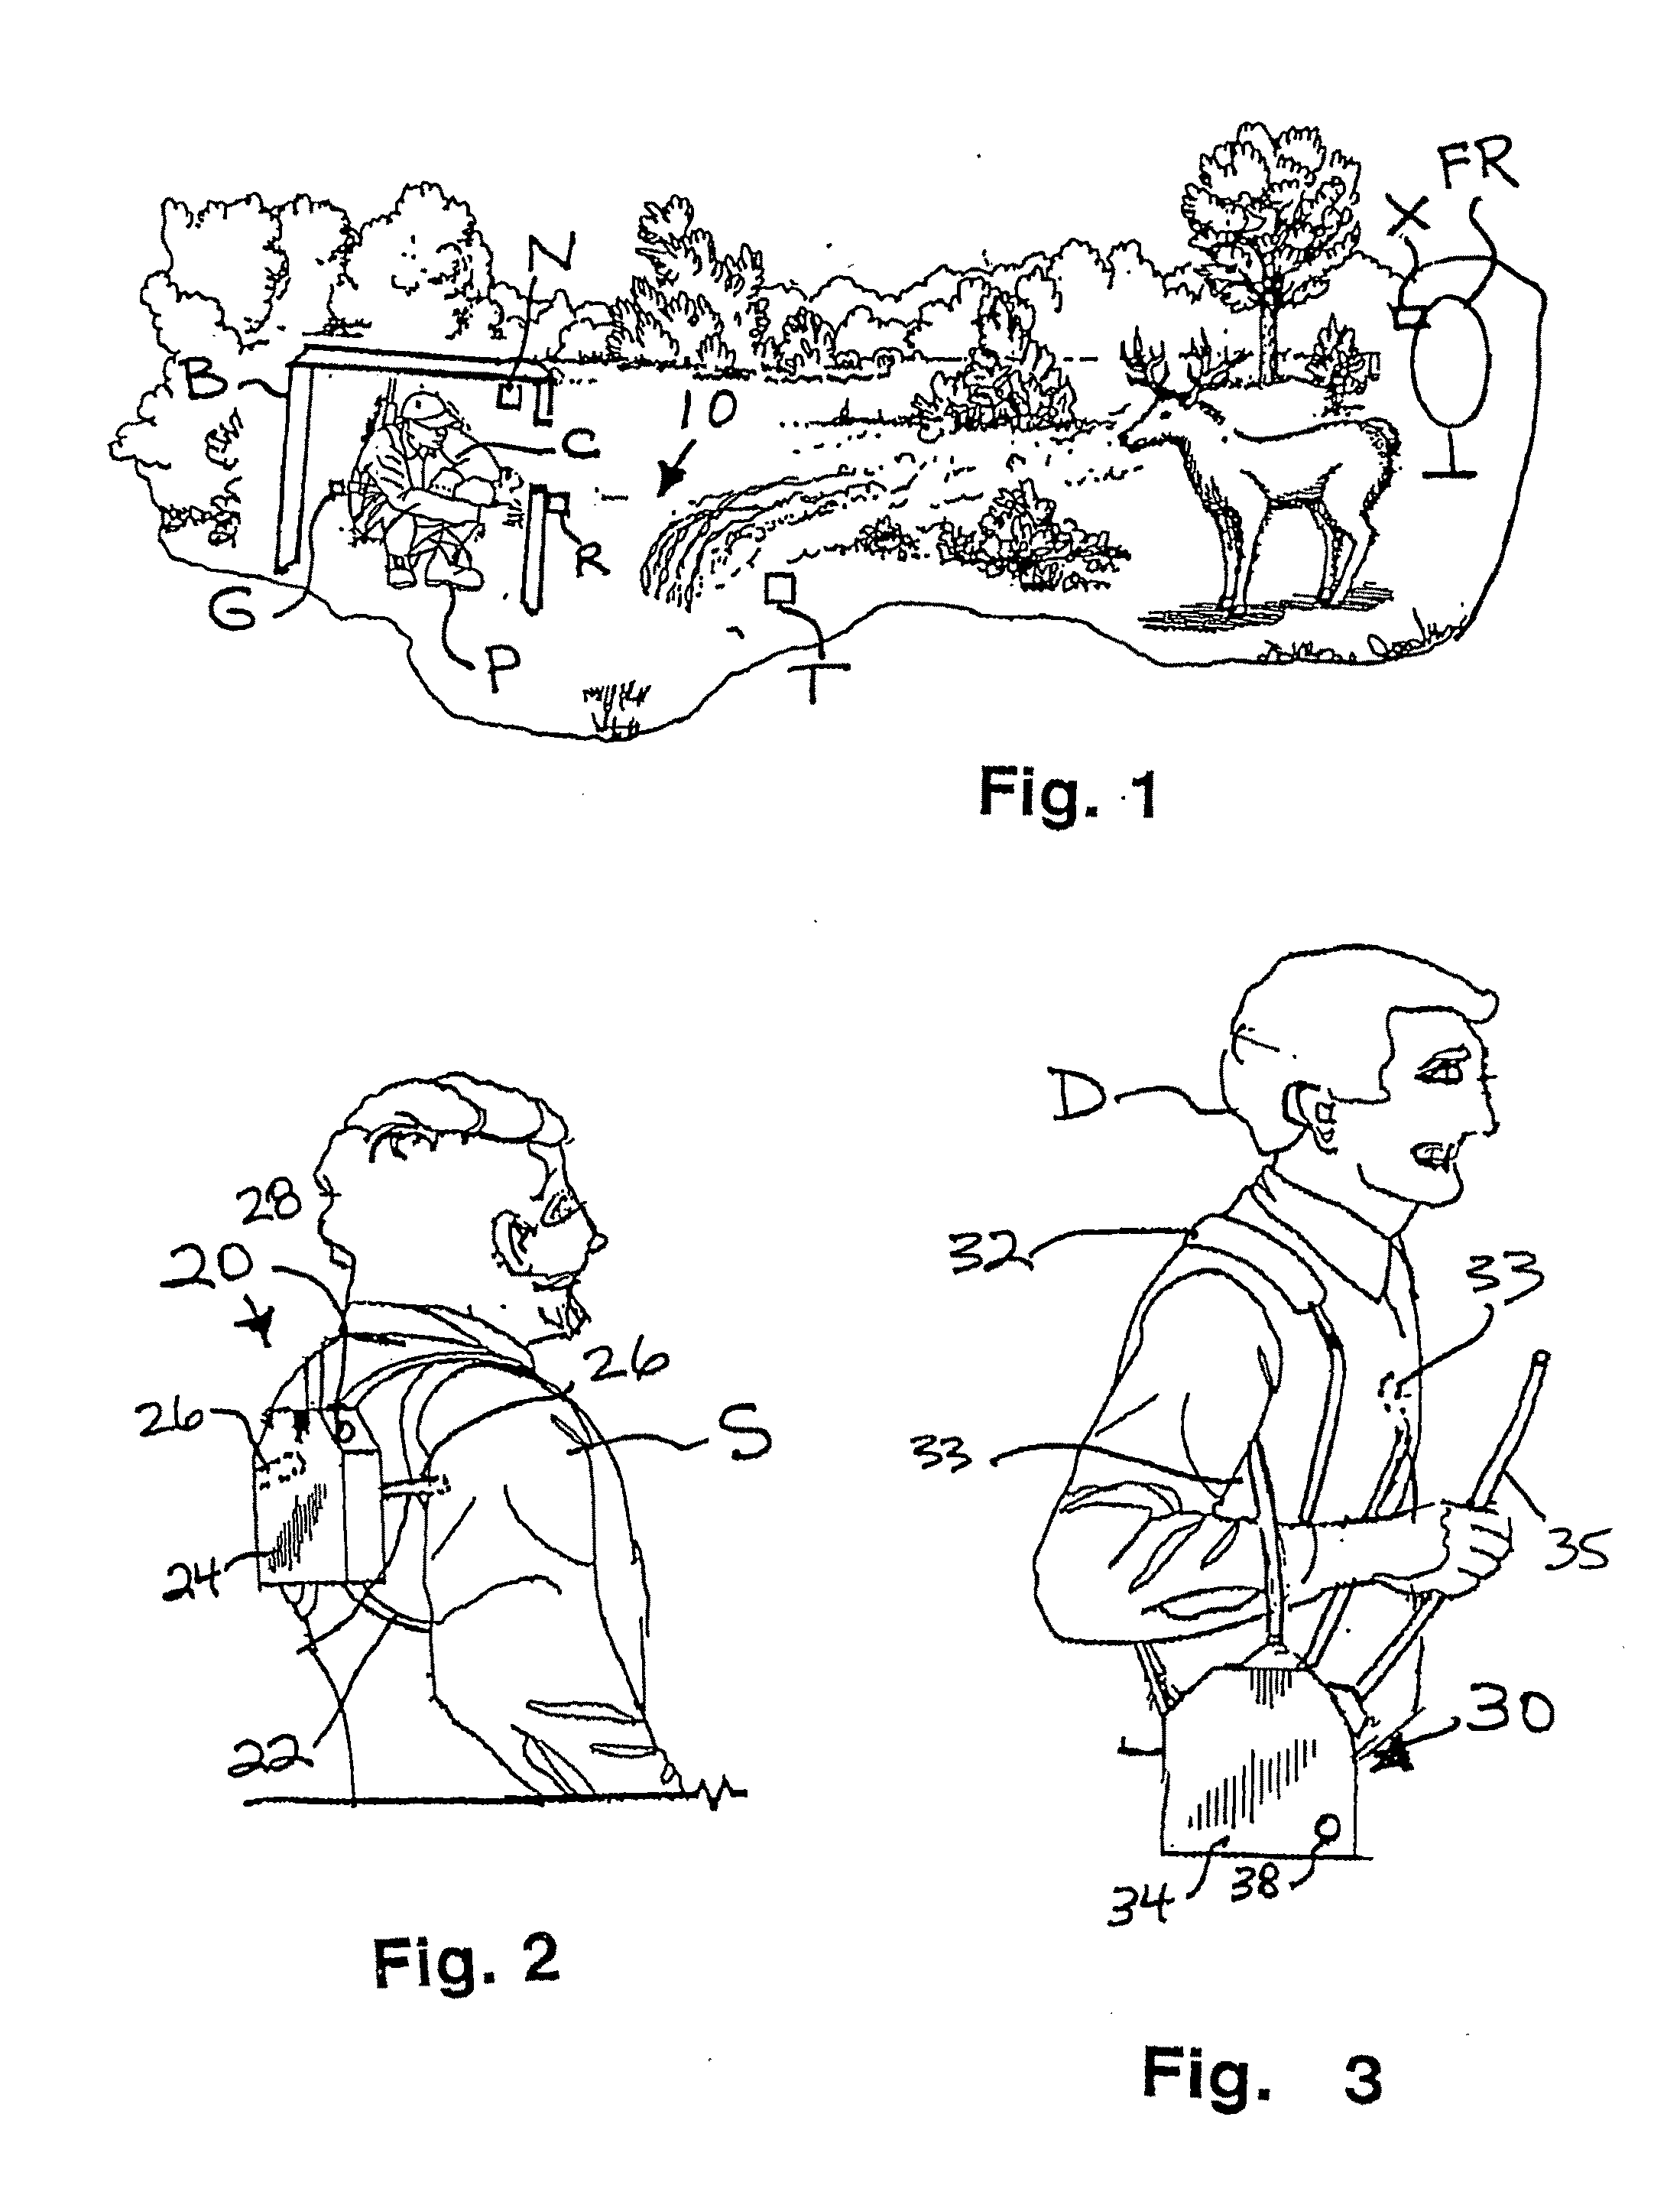 Systems and methods for detecting descented material